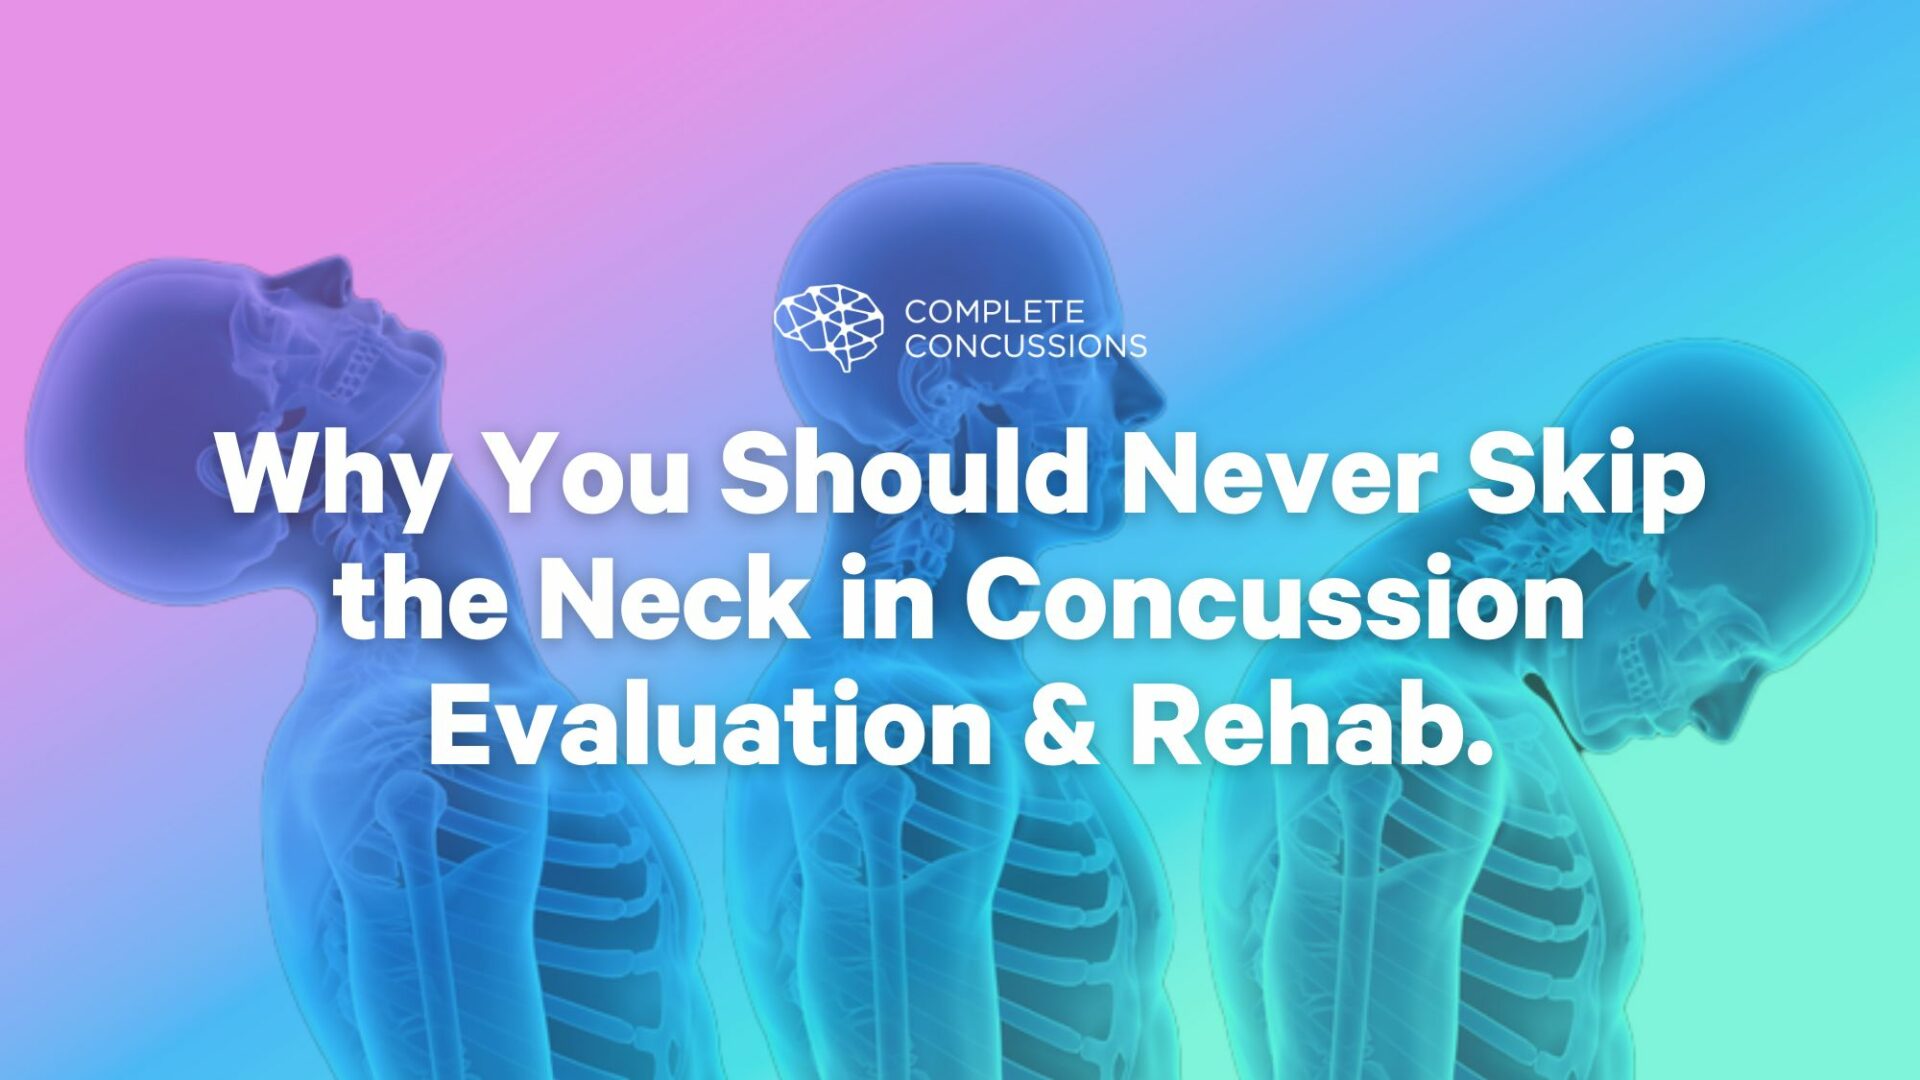 Why You Should Never Skip the Neck in Concussion Evaluation & Rehab.